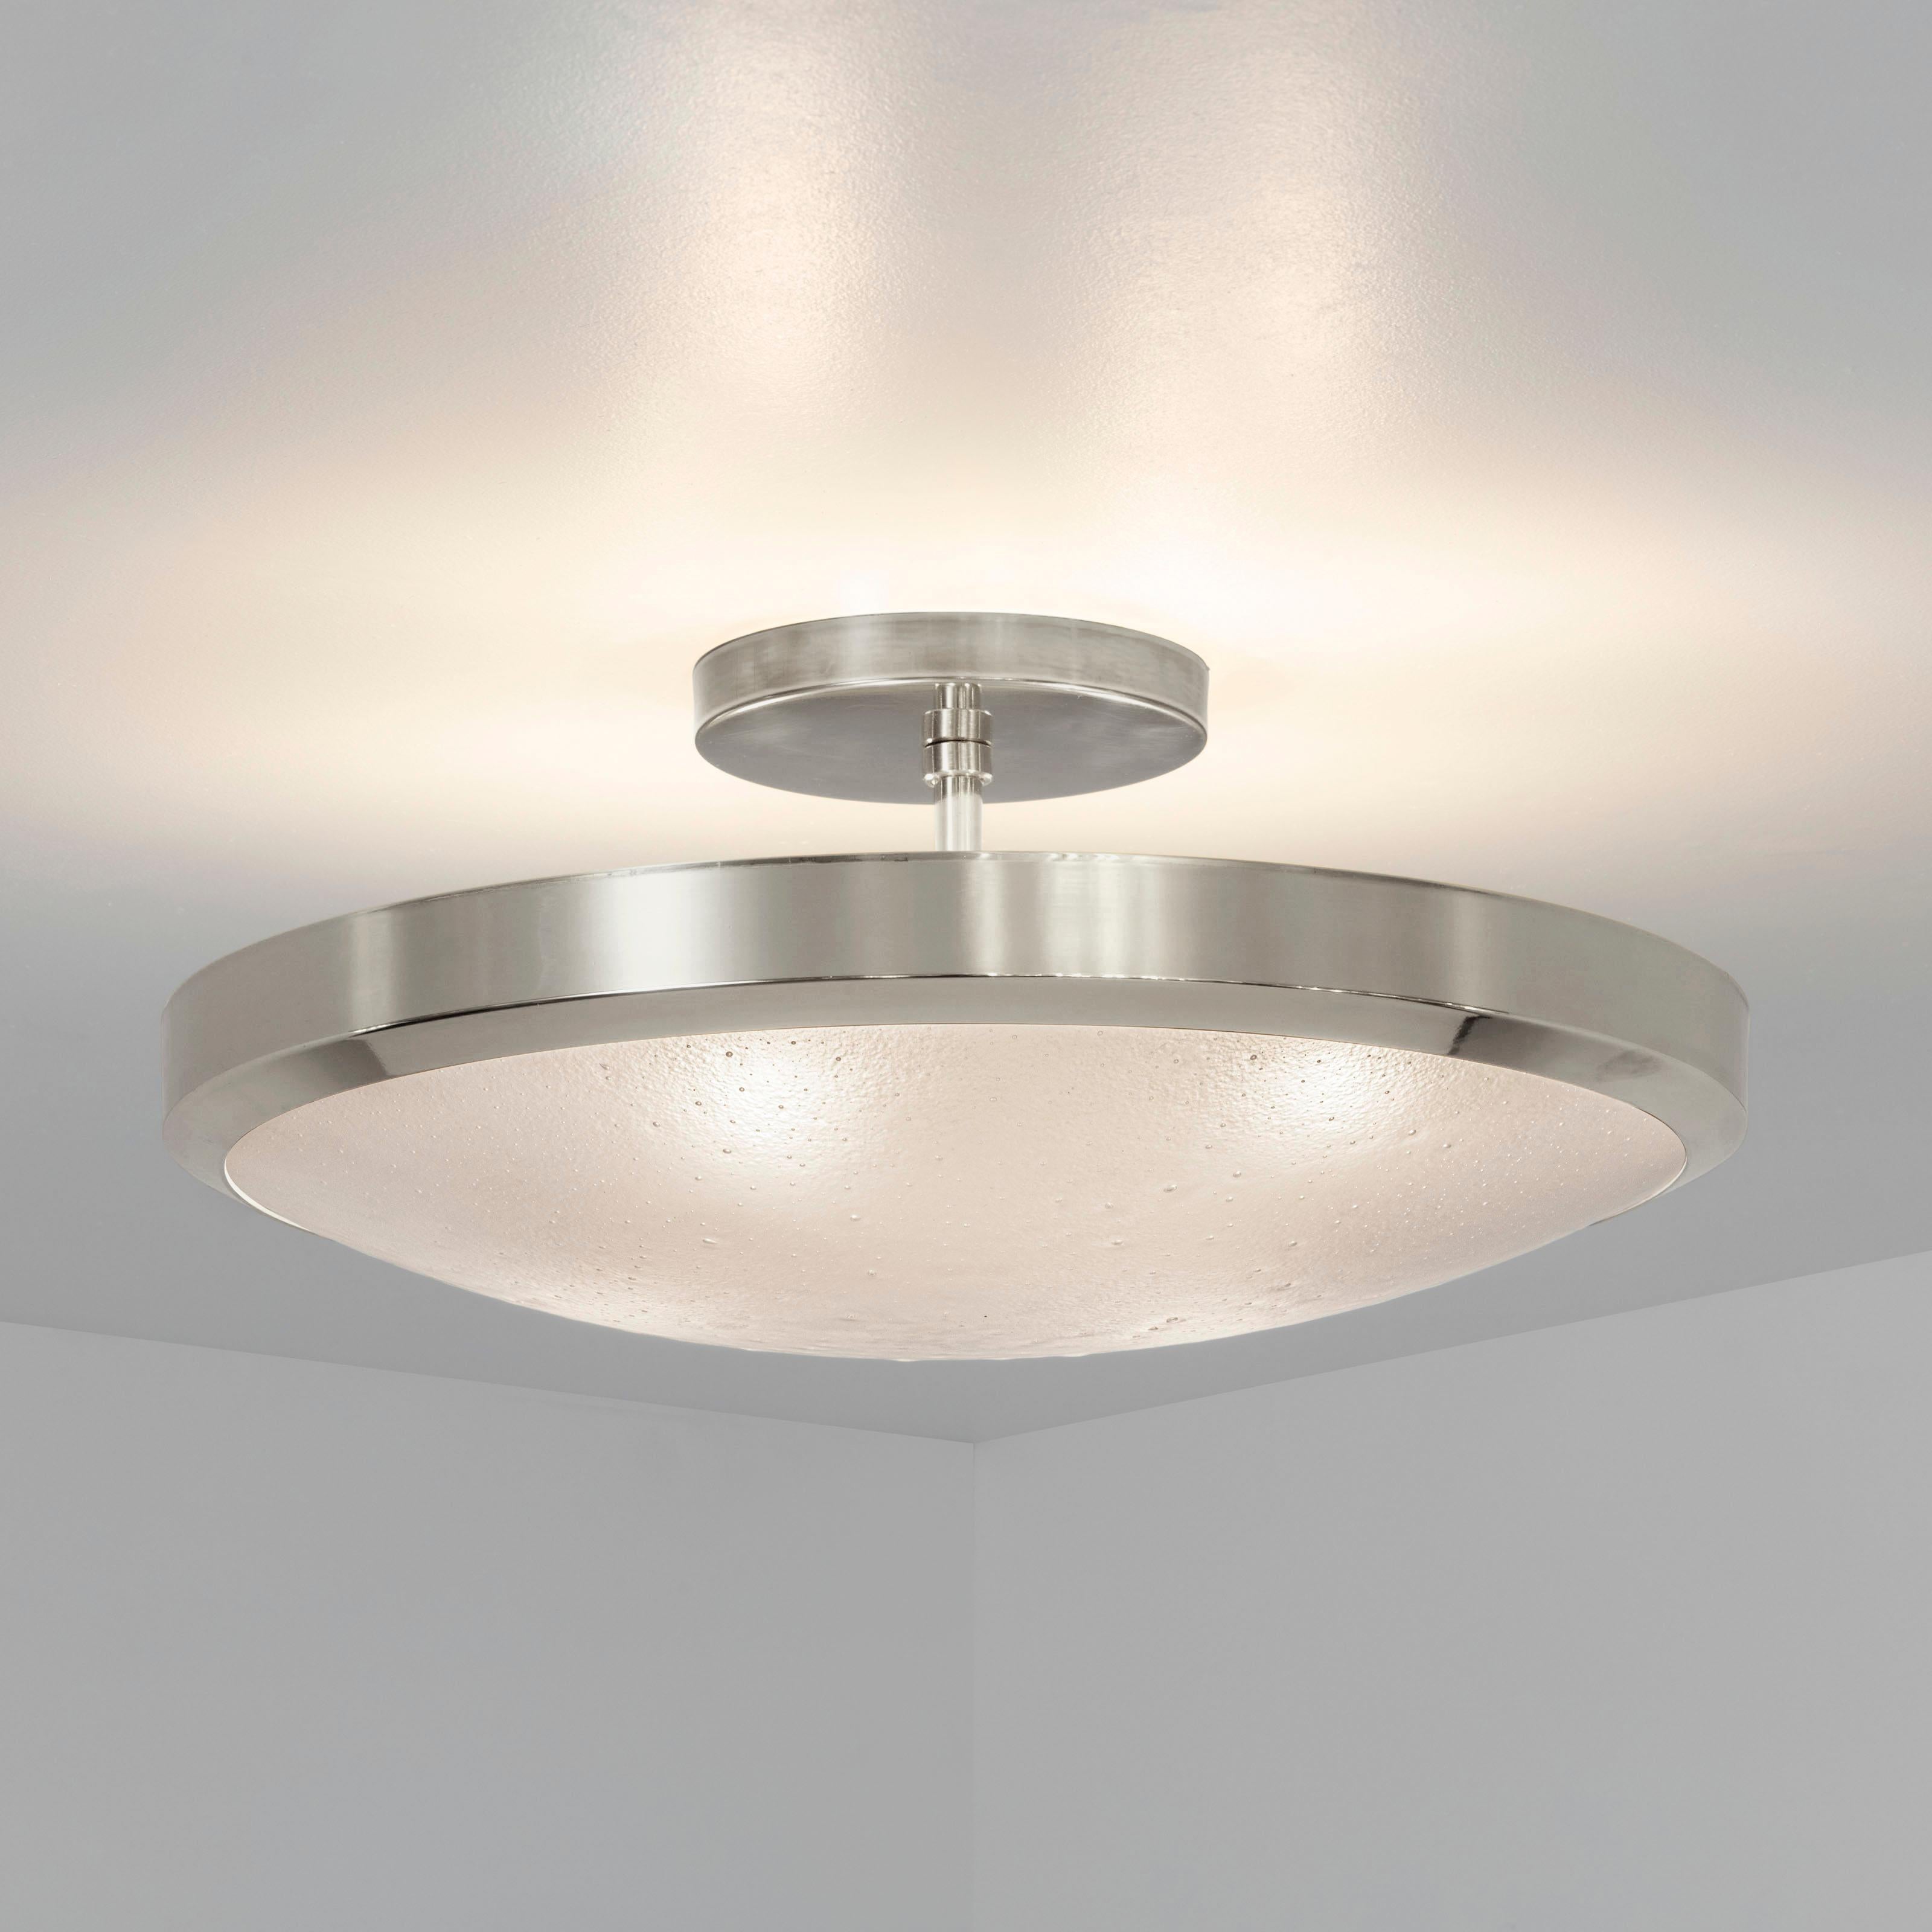 The Uno ceiling light exemplifies simple elegance via its clean profile designed around a single Murano glass shade.

Starting pricing by size-premium finishes have a 10%